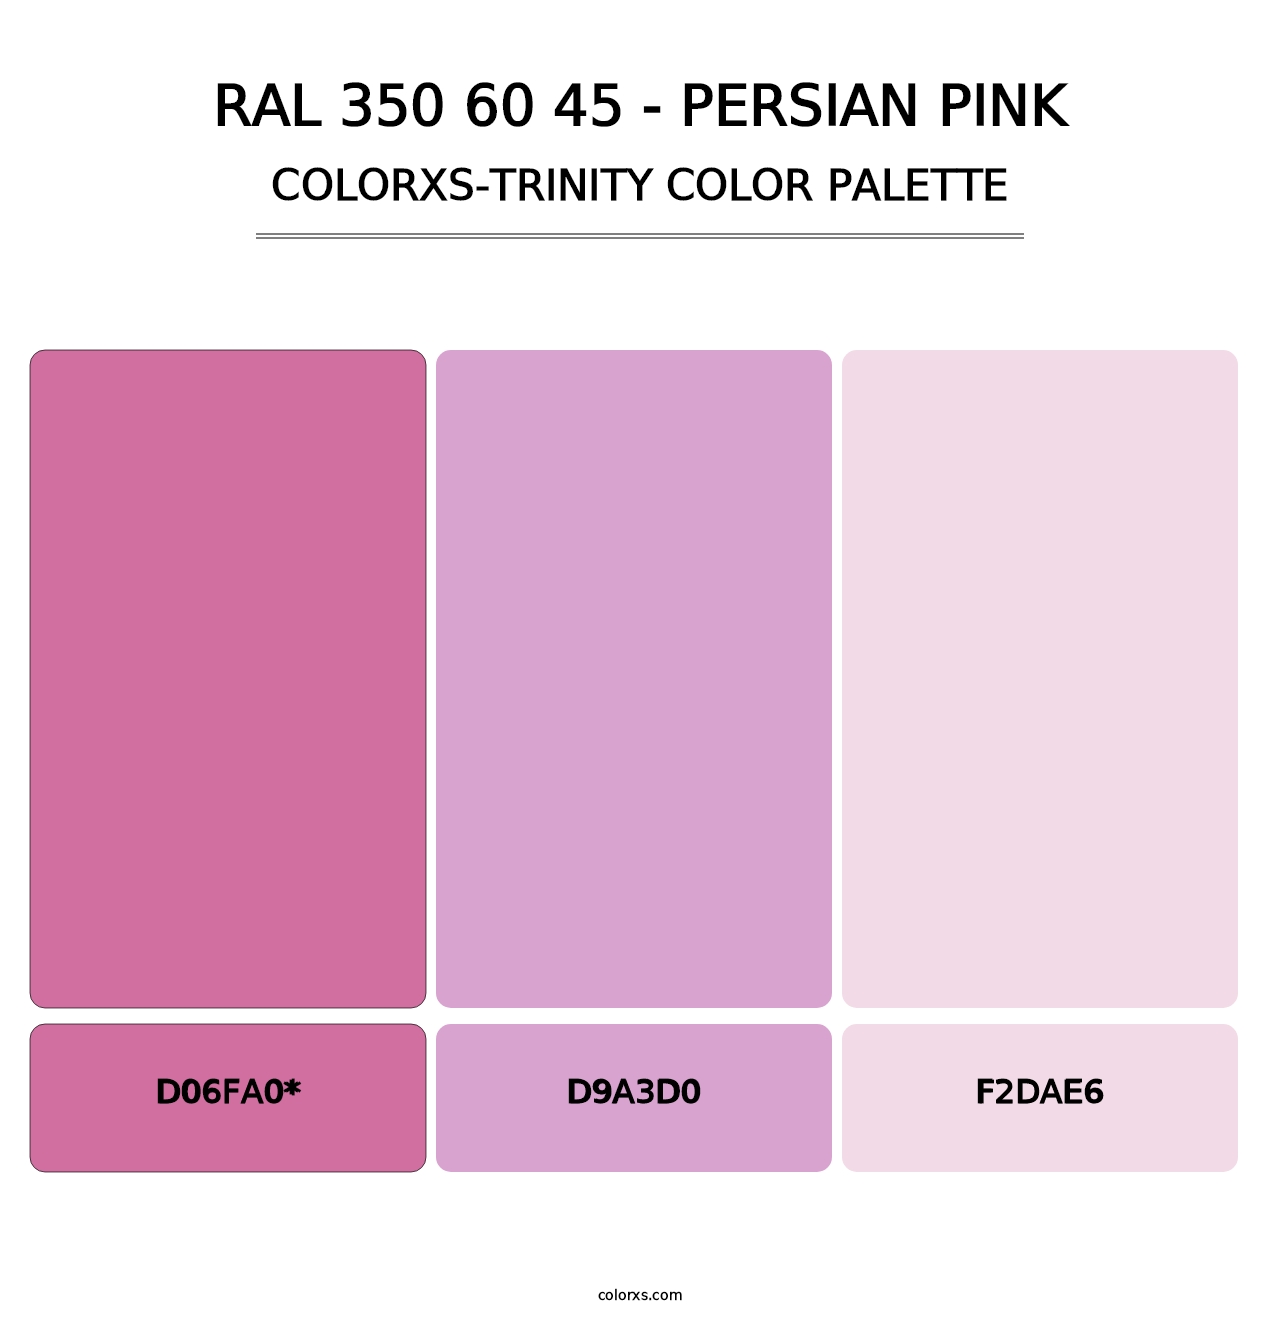 RAL 350 60 45 - Persian Pink - Colorxs Trinity Palette